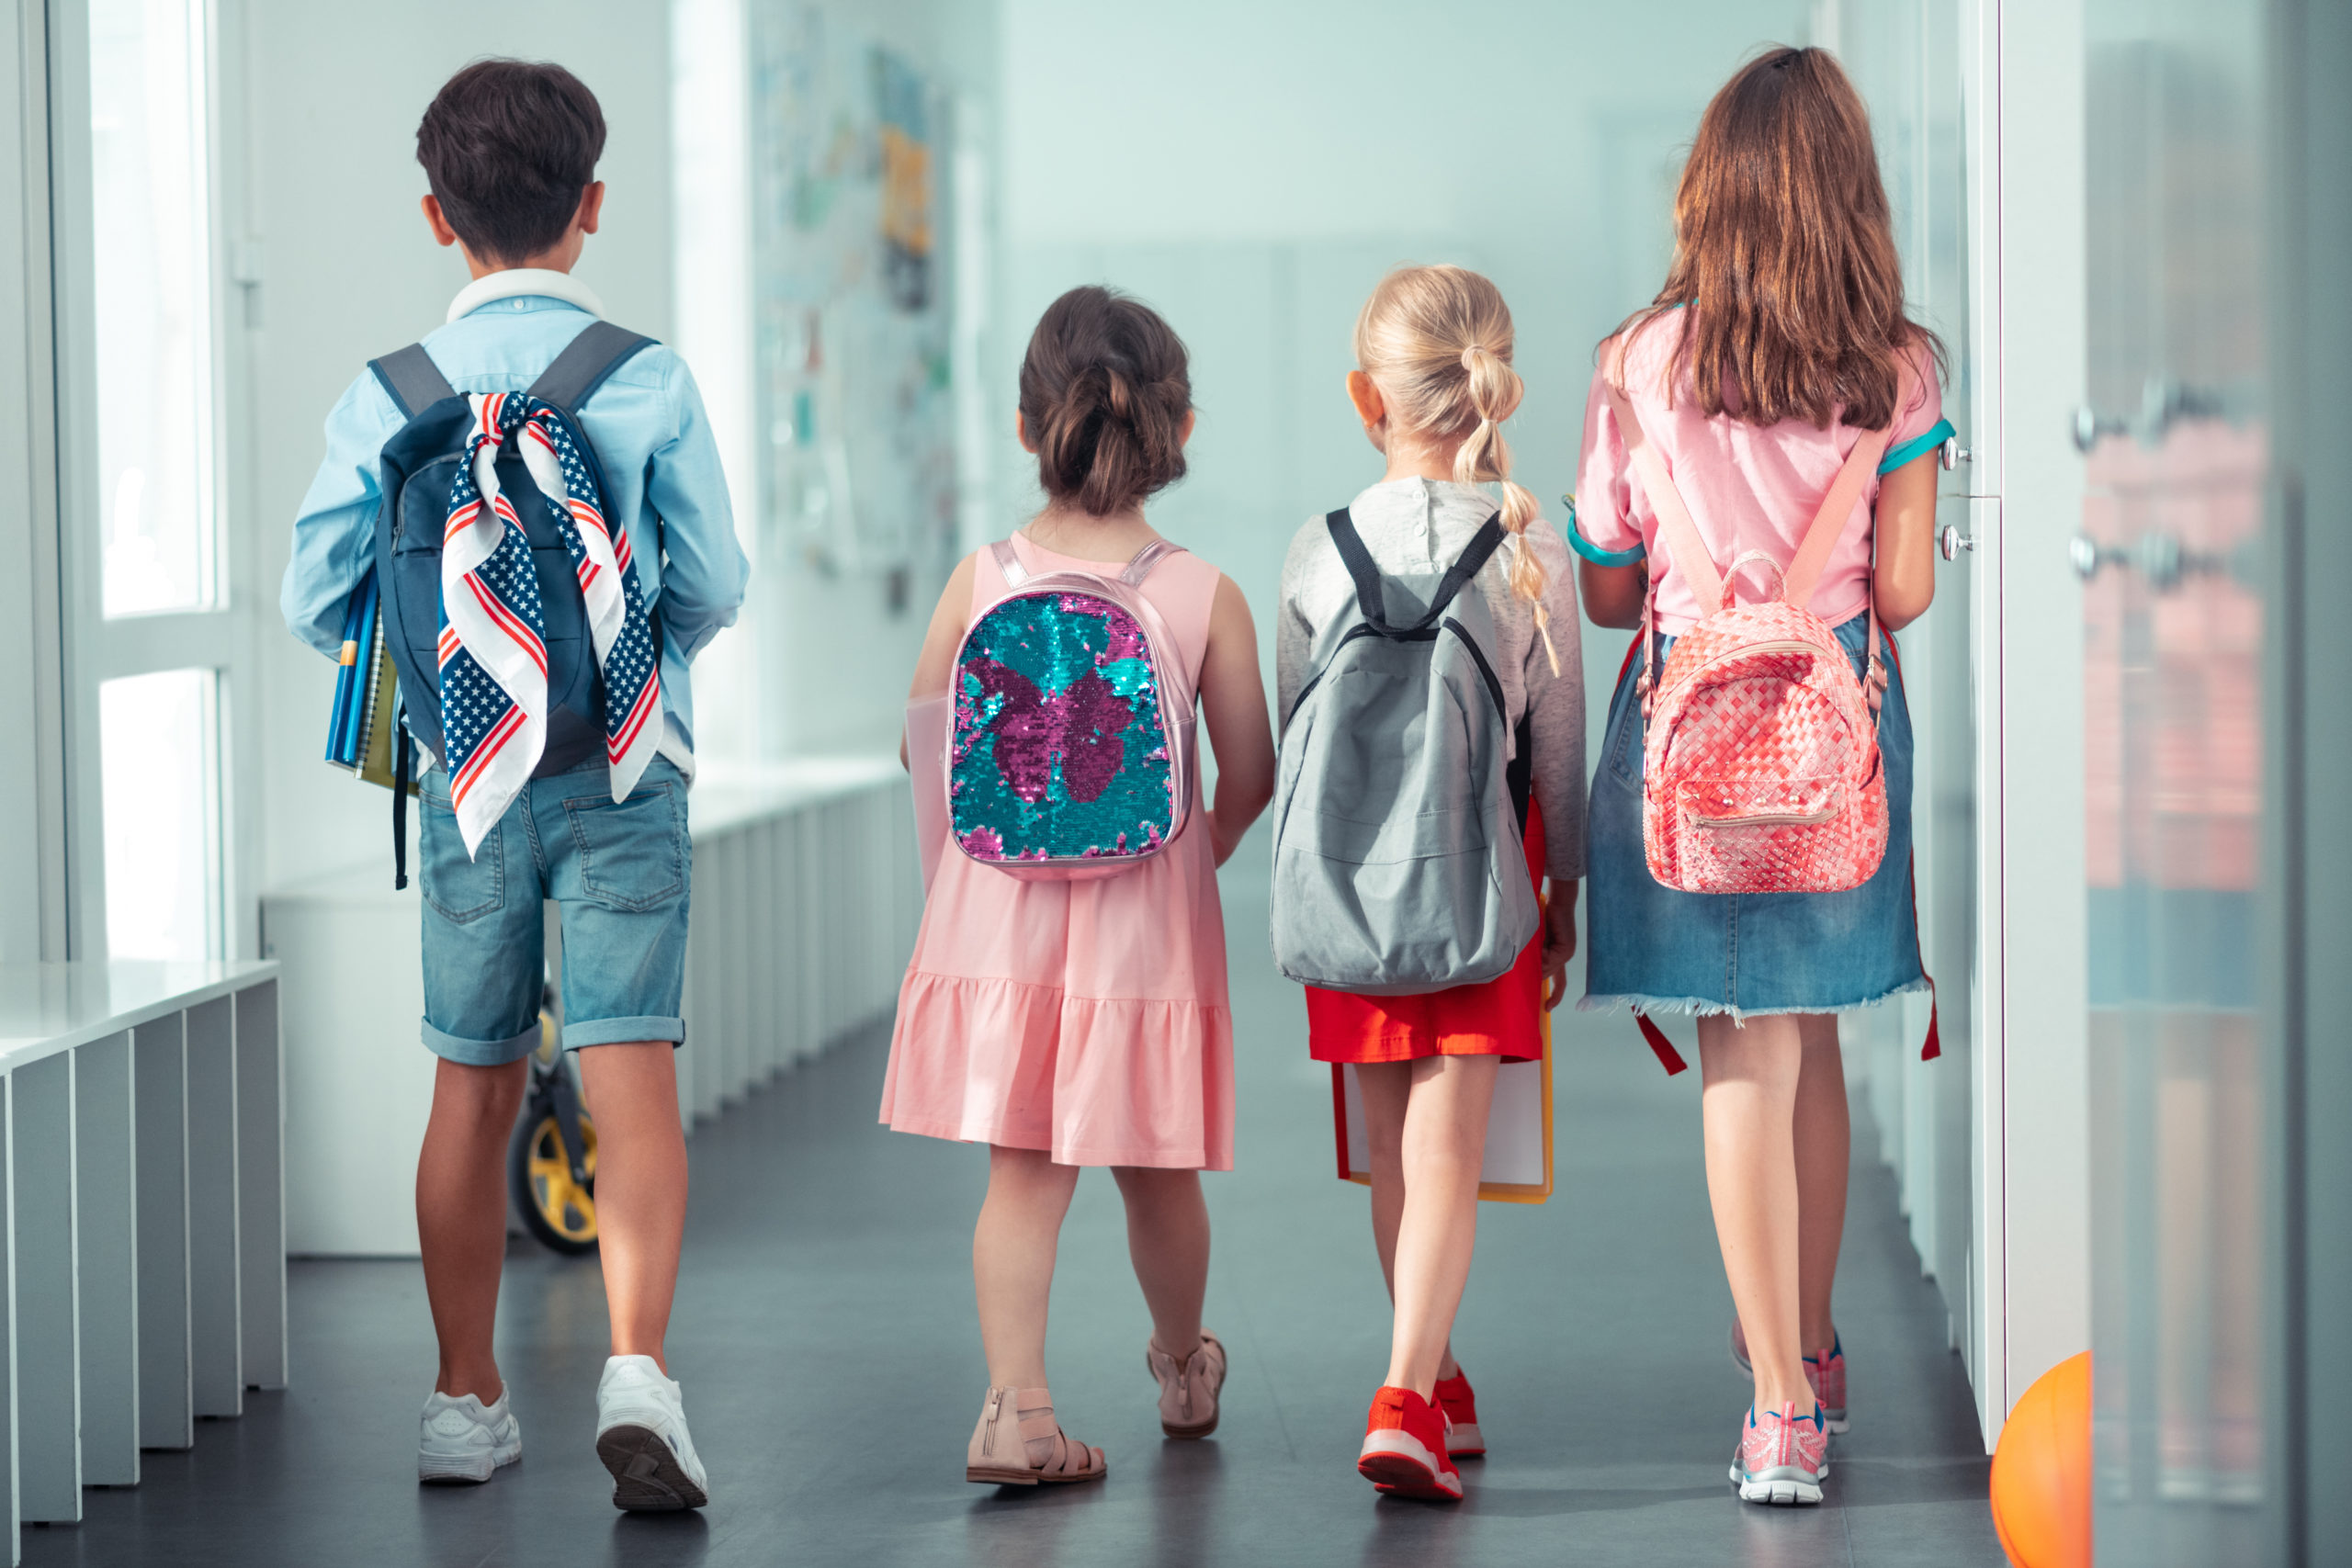 Prepare for a healthy return at Precious Memories Preschool of Sandy Hollow with our Back-to-School Wellness Check, ensuring a safe and happy environment.